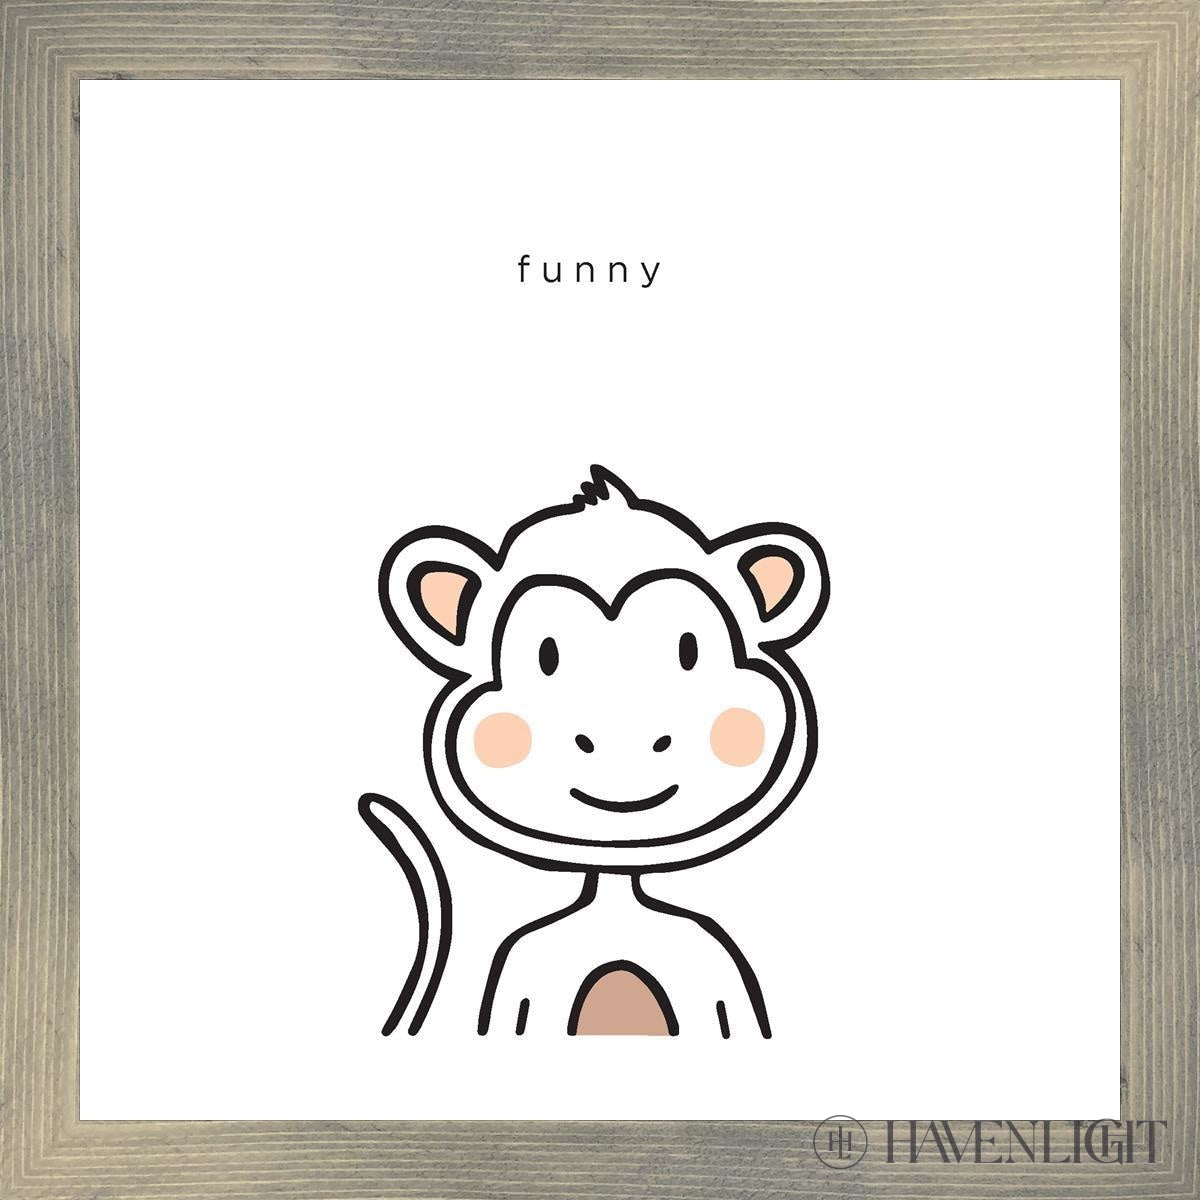 How To Draw A Cute Monkey For Kids